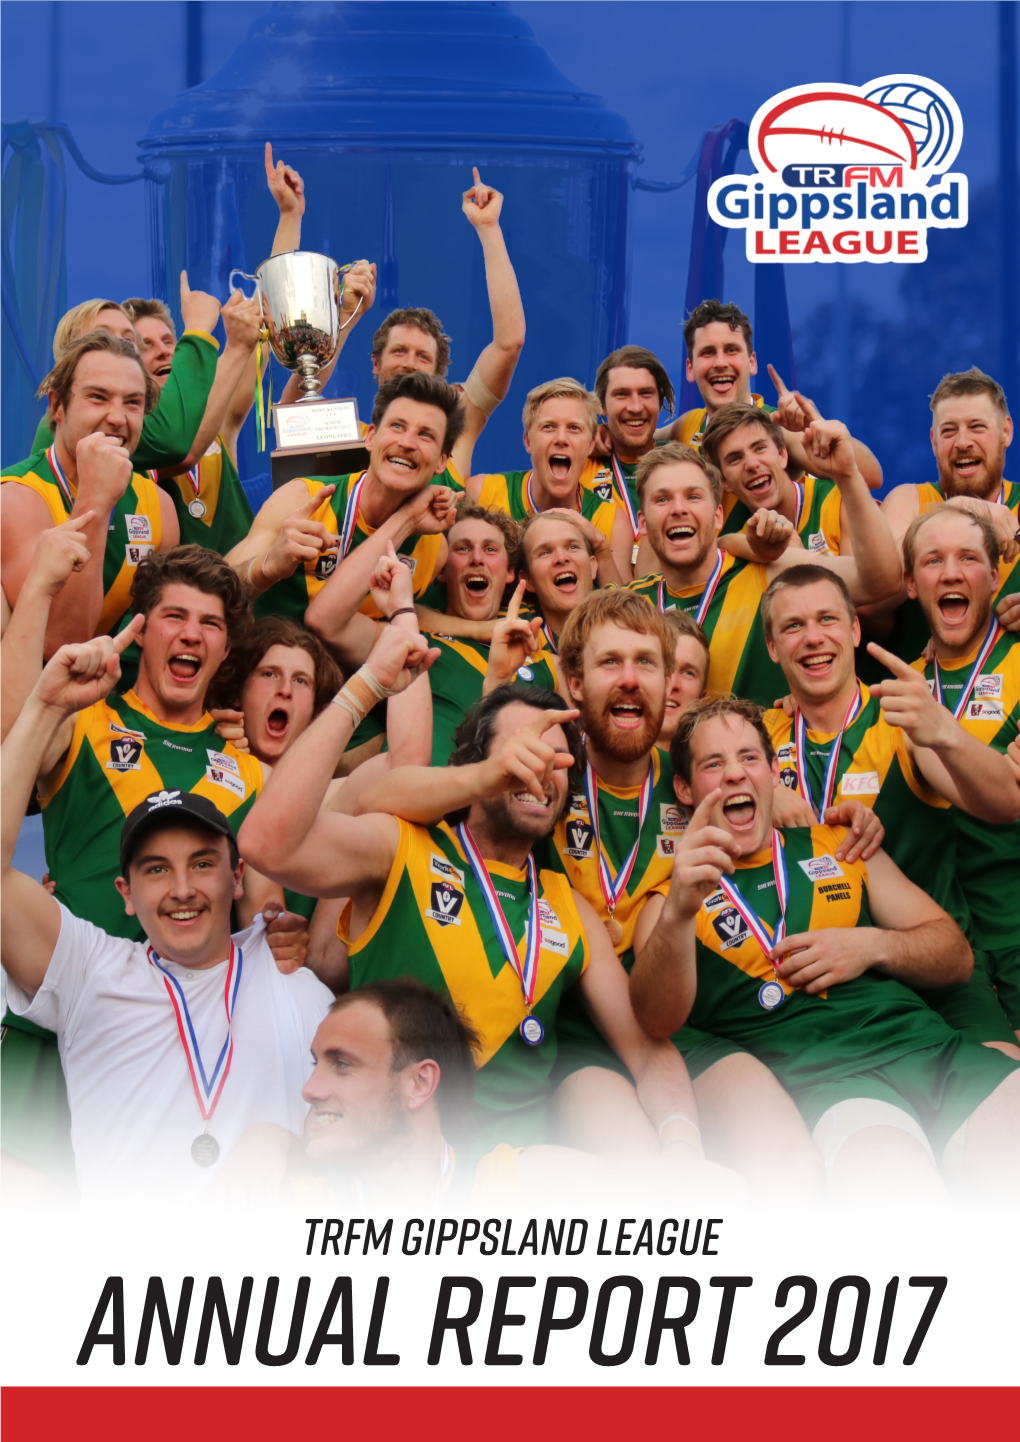 TRFM Gippsland League ANNUAL REPORT 2017 Reserves Premiers - Morwell